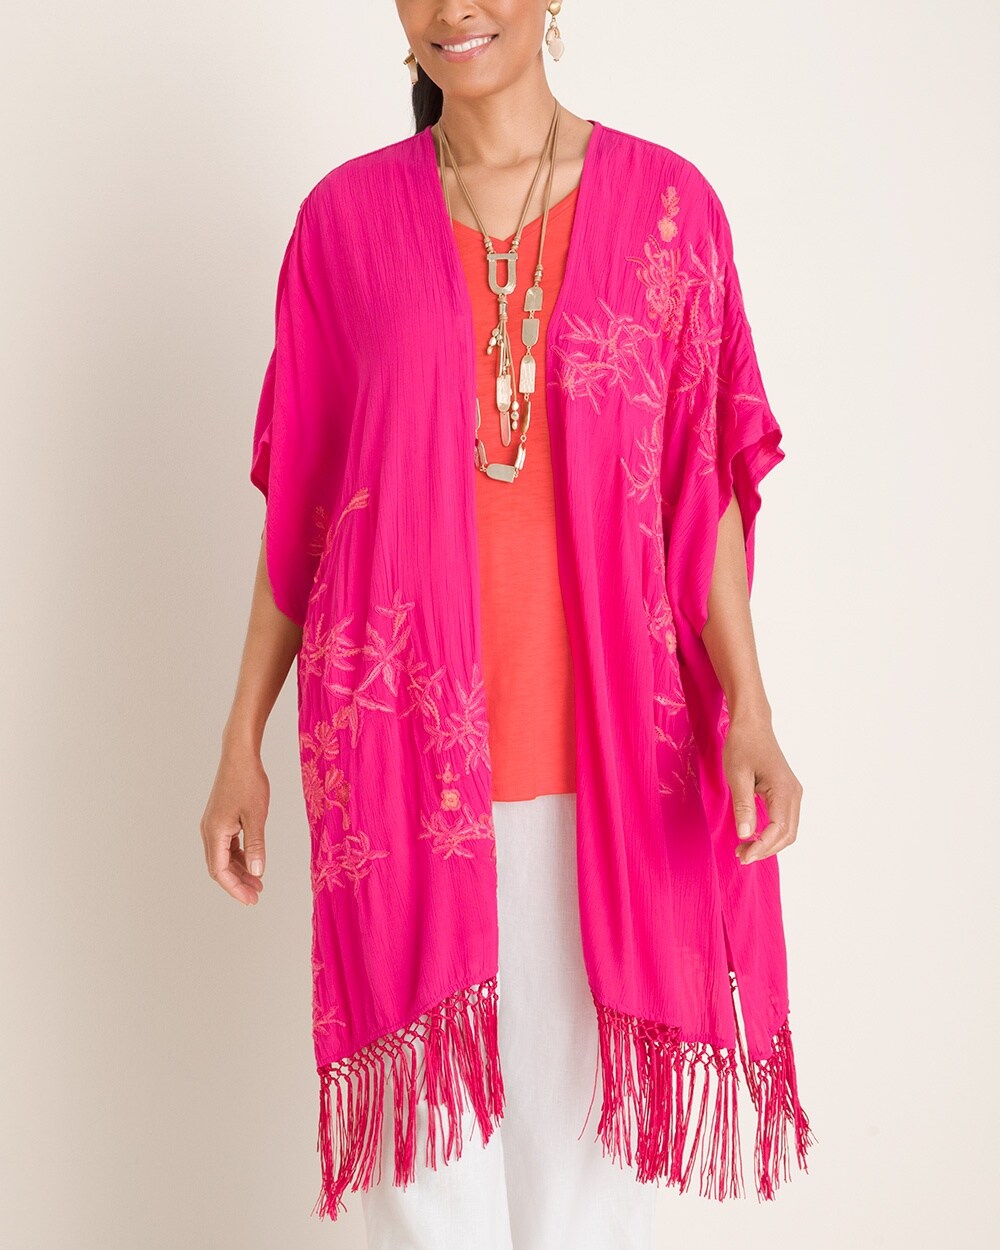 Floral Embroidered Berry Pink Ruana Wrap